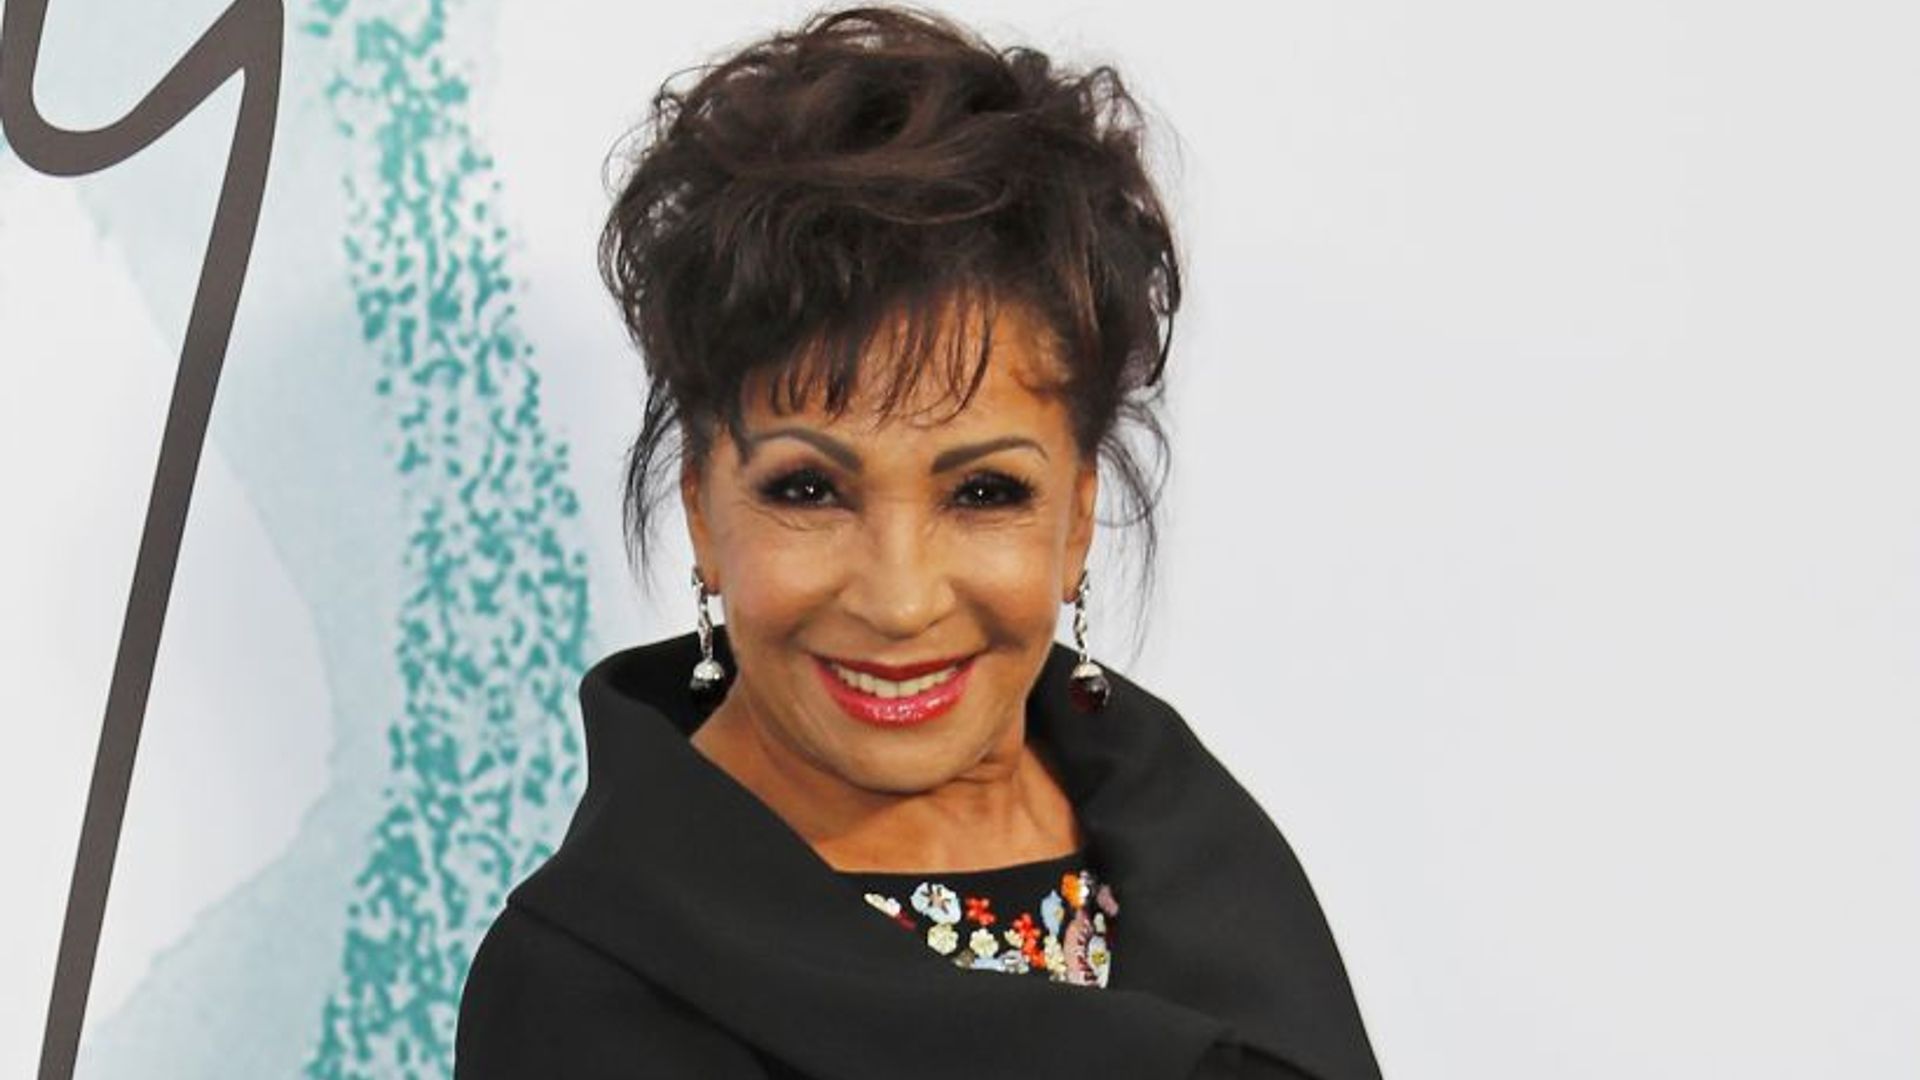 Dame Shirley Bassey assures fans she's alive and well after another singer announced she'd died